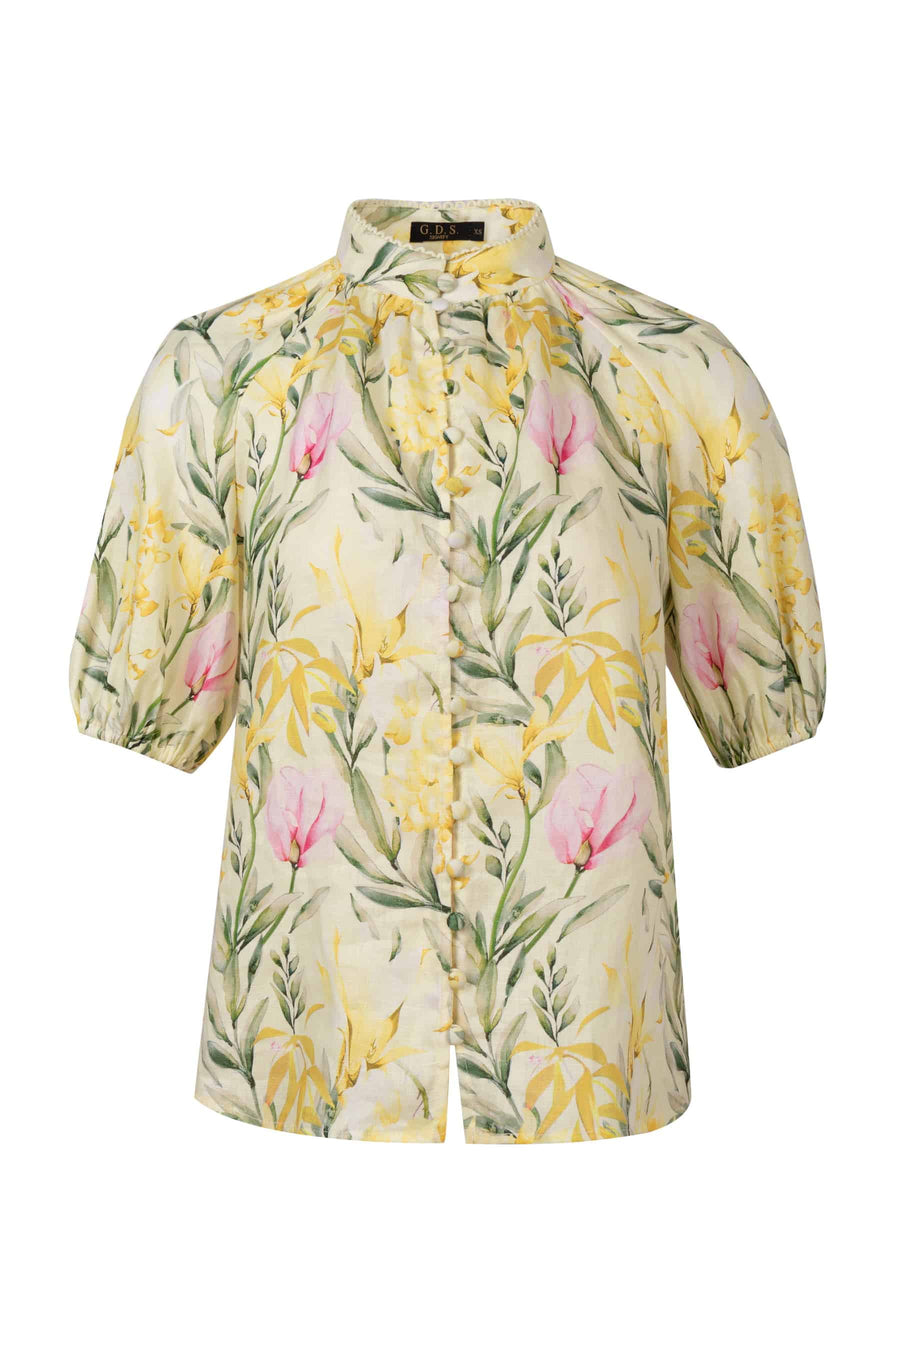 GDS Desiree Floral Linen Blouse | Yellow BLOUSES BLOUSES BRUNCH Catch GDS HOLIDAY L M S SPRING-SUMMER WORK XL XS YELLOW